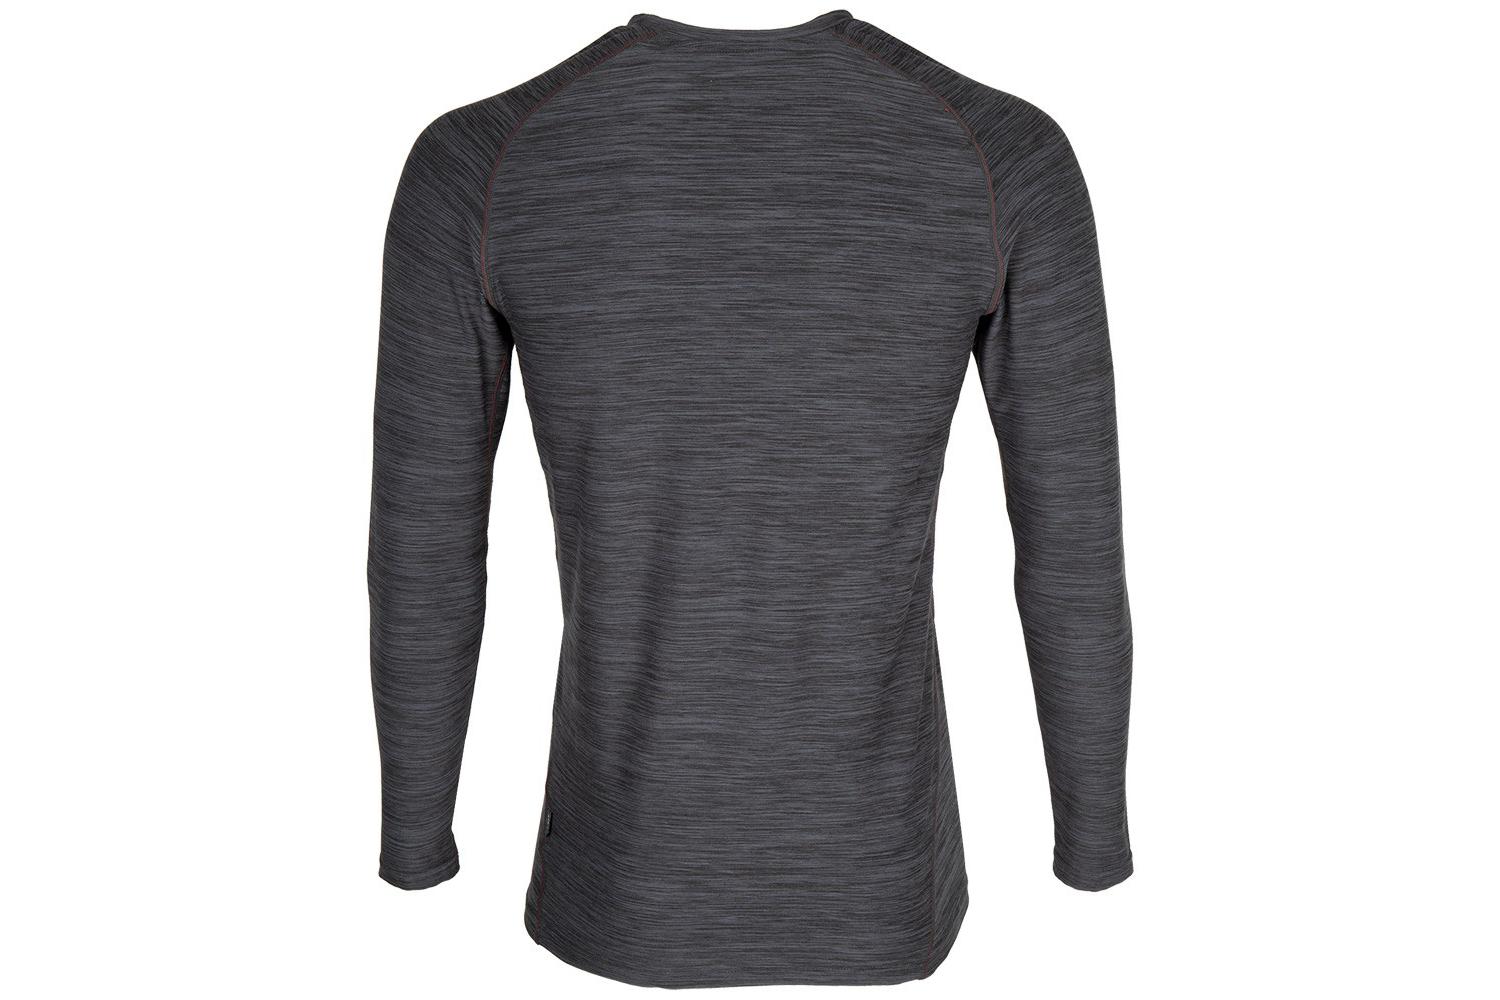 Gill heren thermo long sleeve grijs M